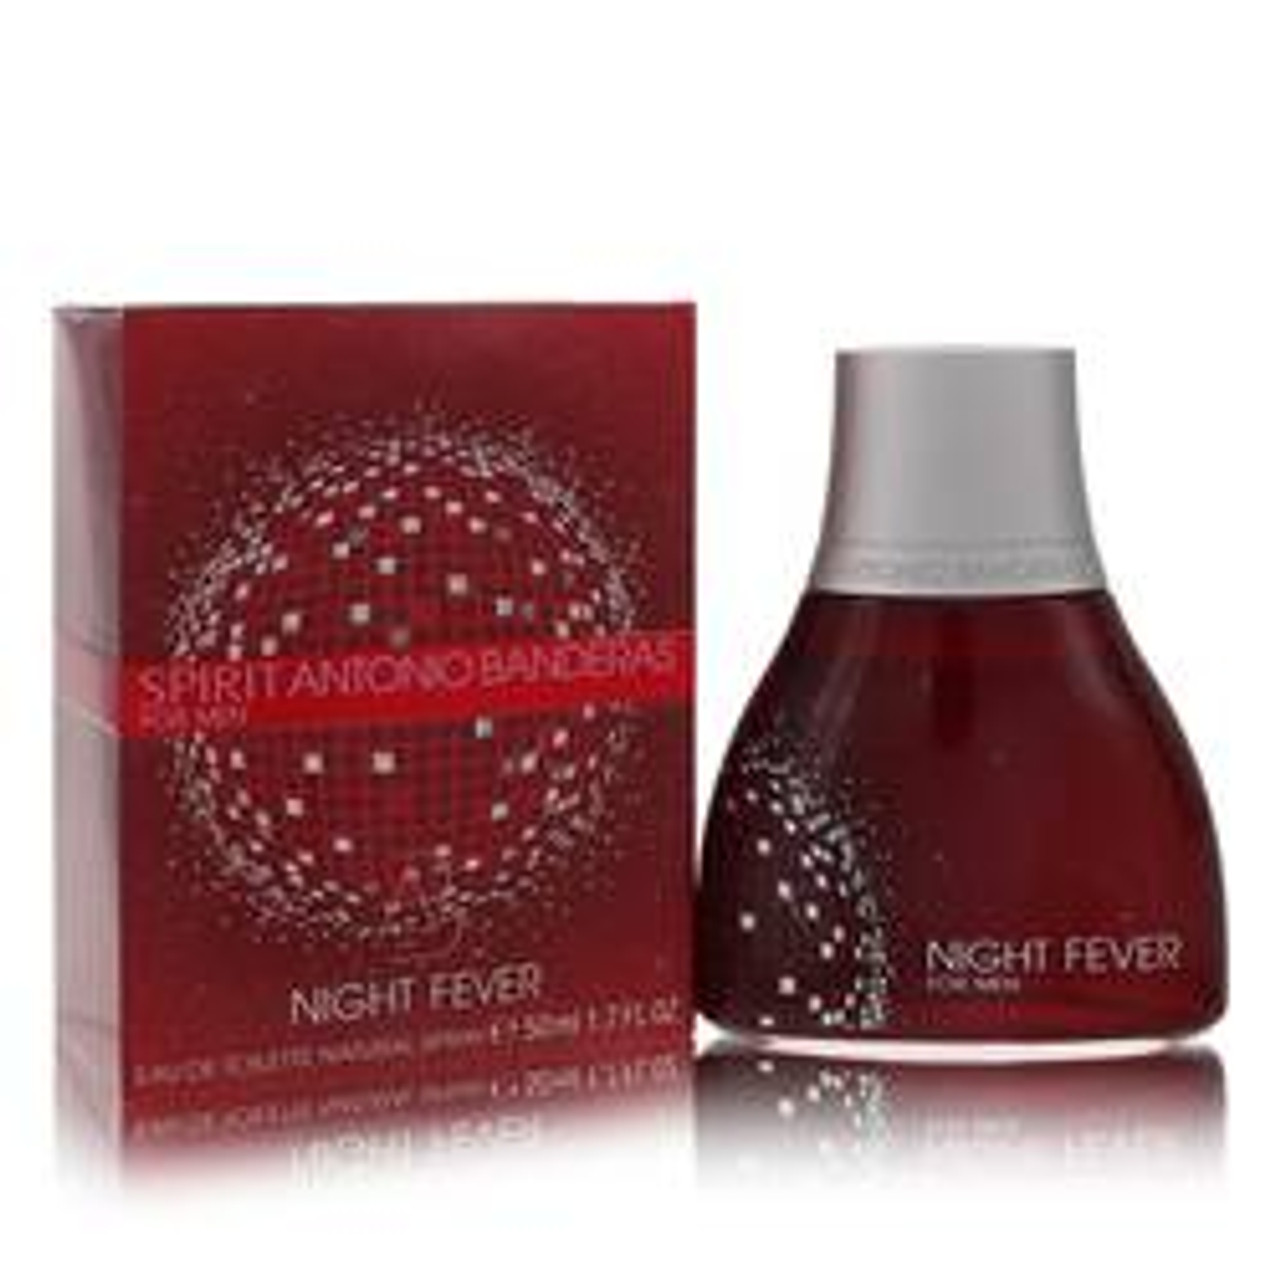 Spirit Night Fever Cologne By Antonio Banderas Eau De Toilette Spray 1.7 oz for Men - [From 50.33 - Choose pk Qty ] - *Ships from Miami